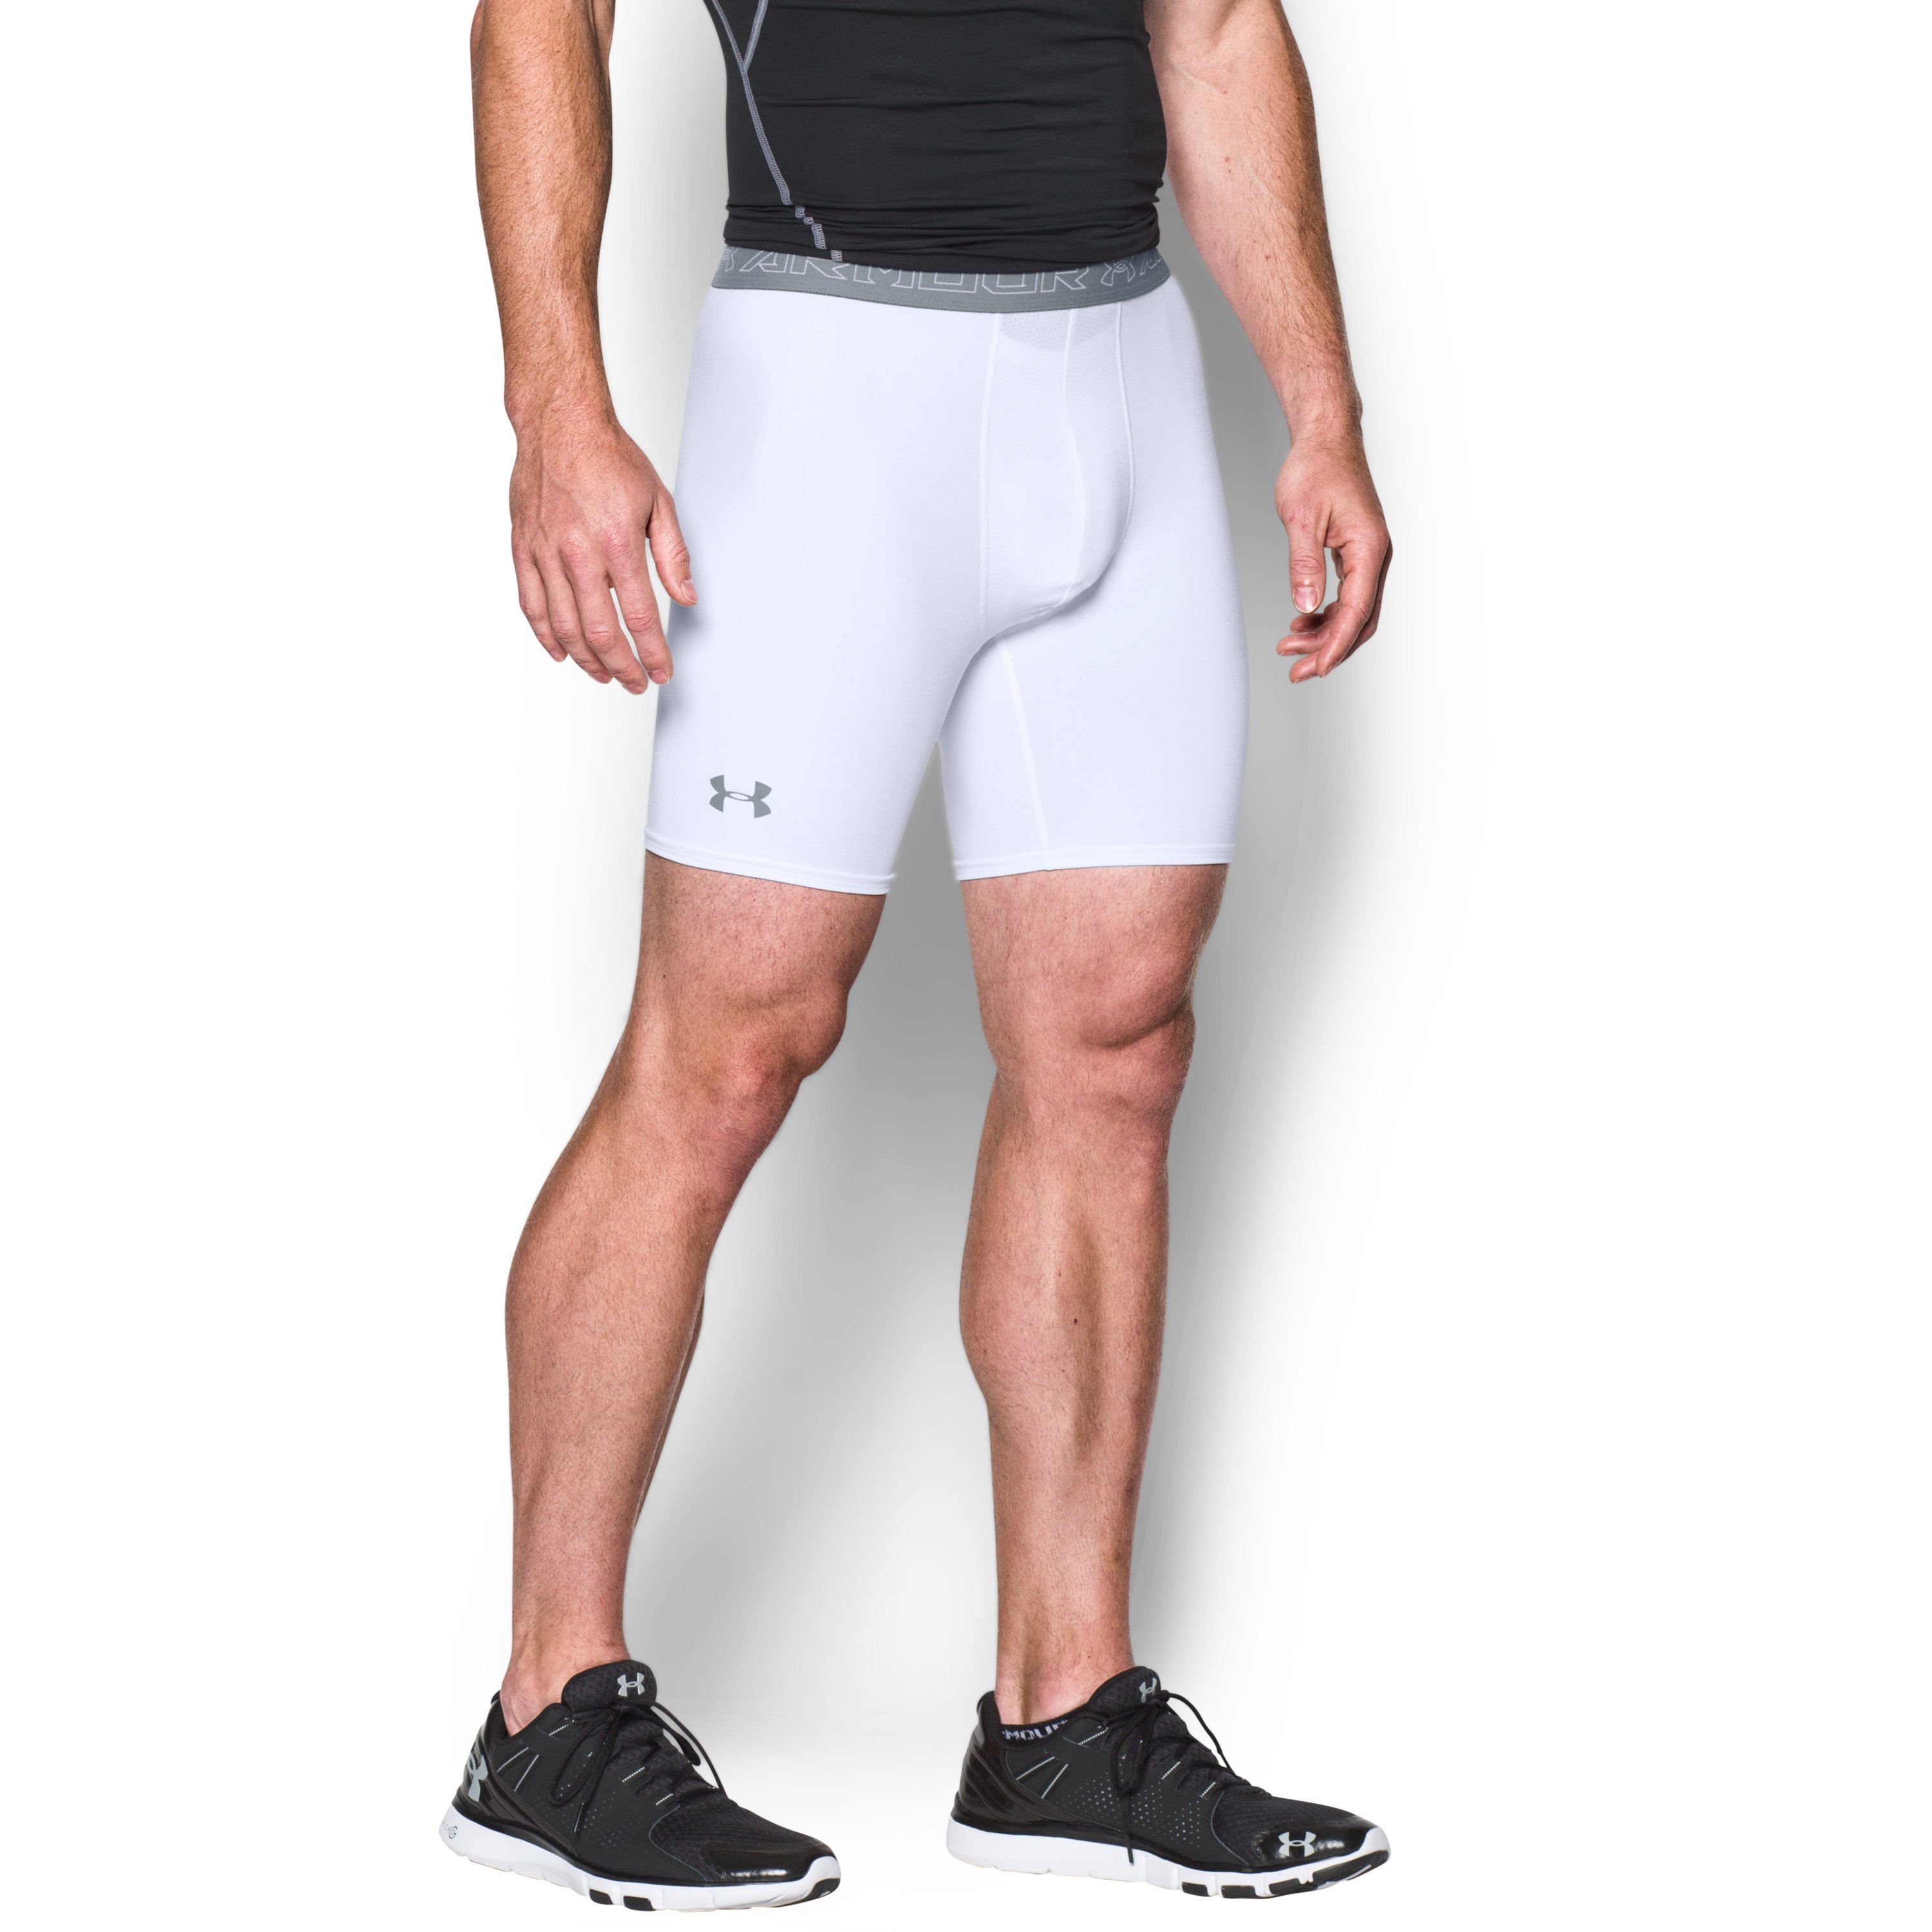 Men\'s Men W/ for in Armour Armour Pocket Compression Shorts Heatgear® Under Ua | Black Lyst Cup